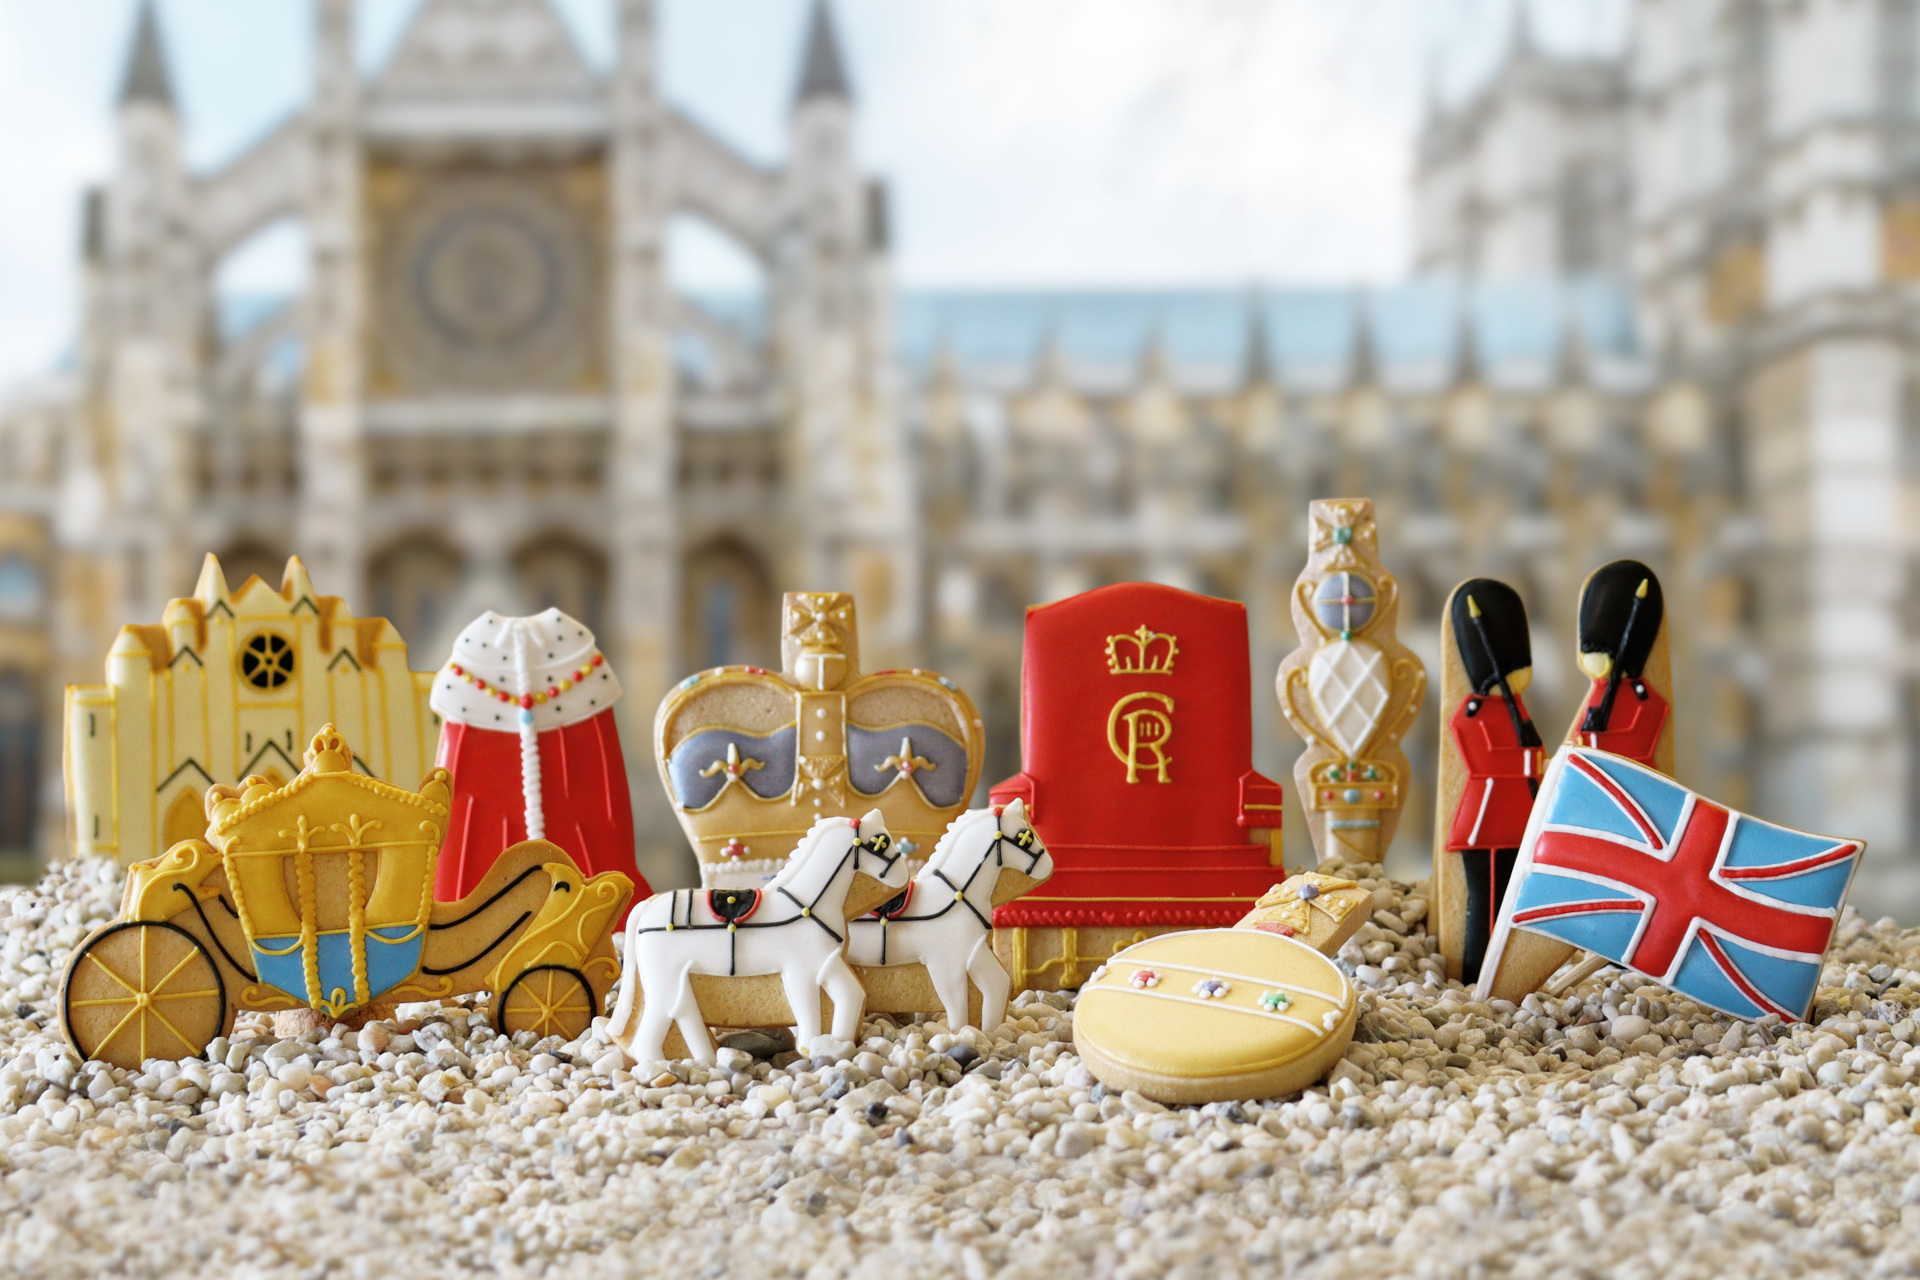 Coronation-themed biscuits lined up on faux gravel